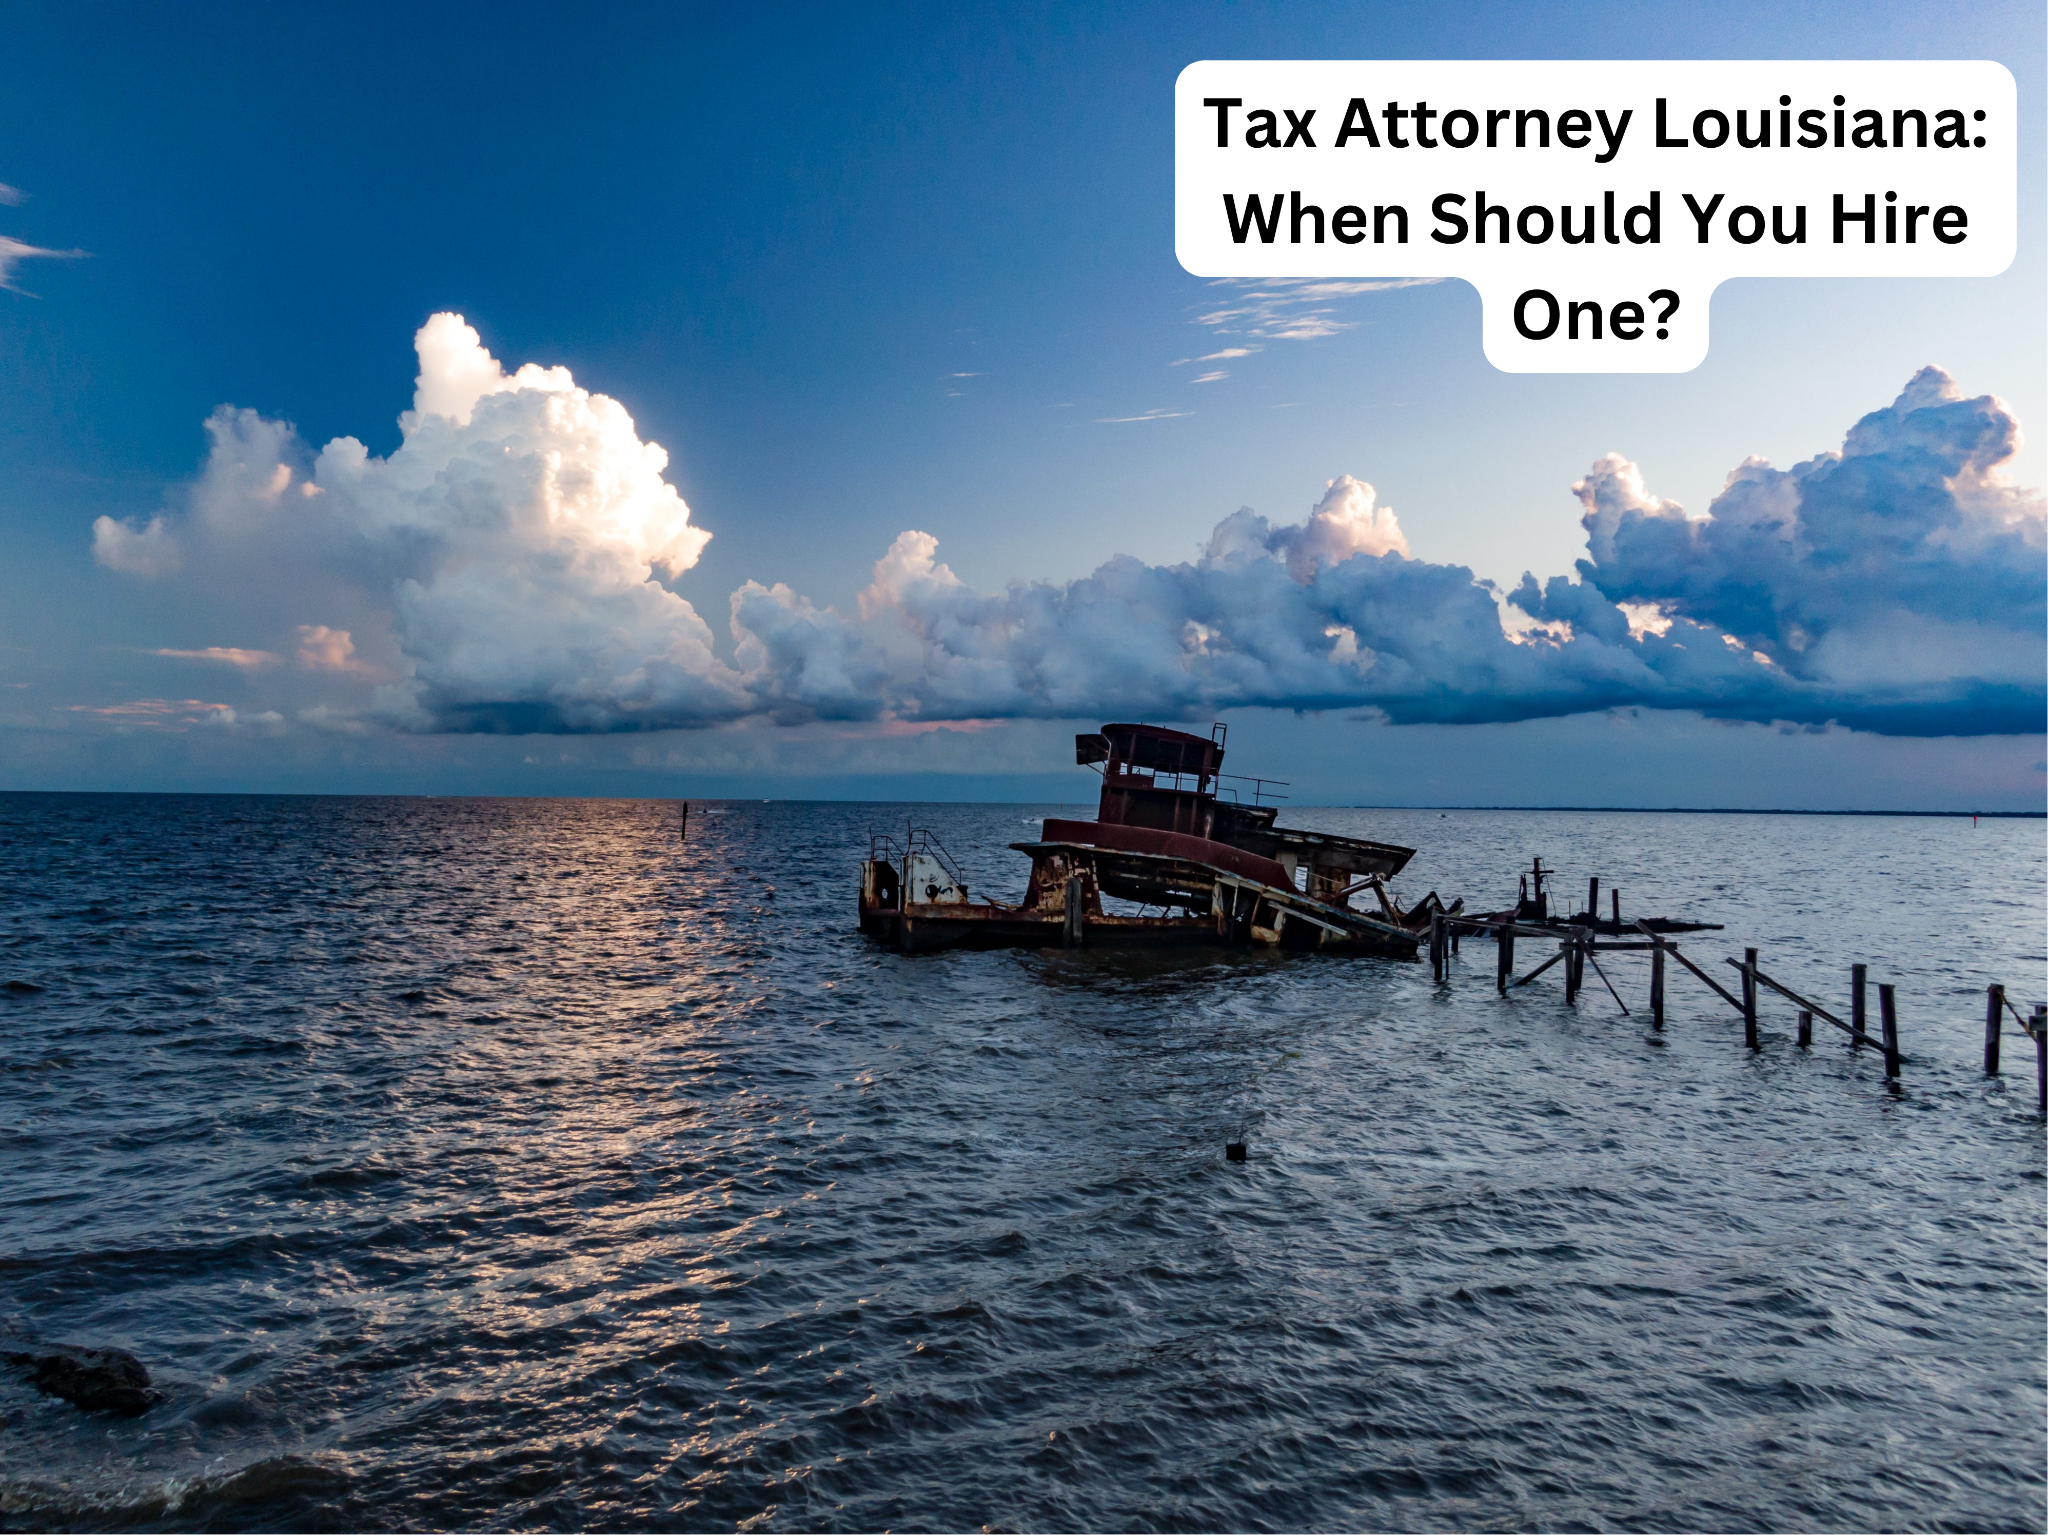 Tax Attorney Louisiana: When Should You Hire One?